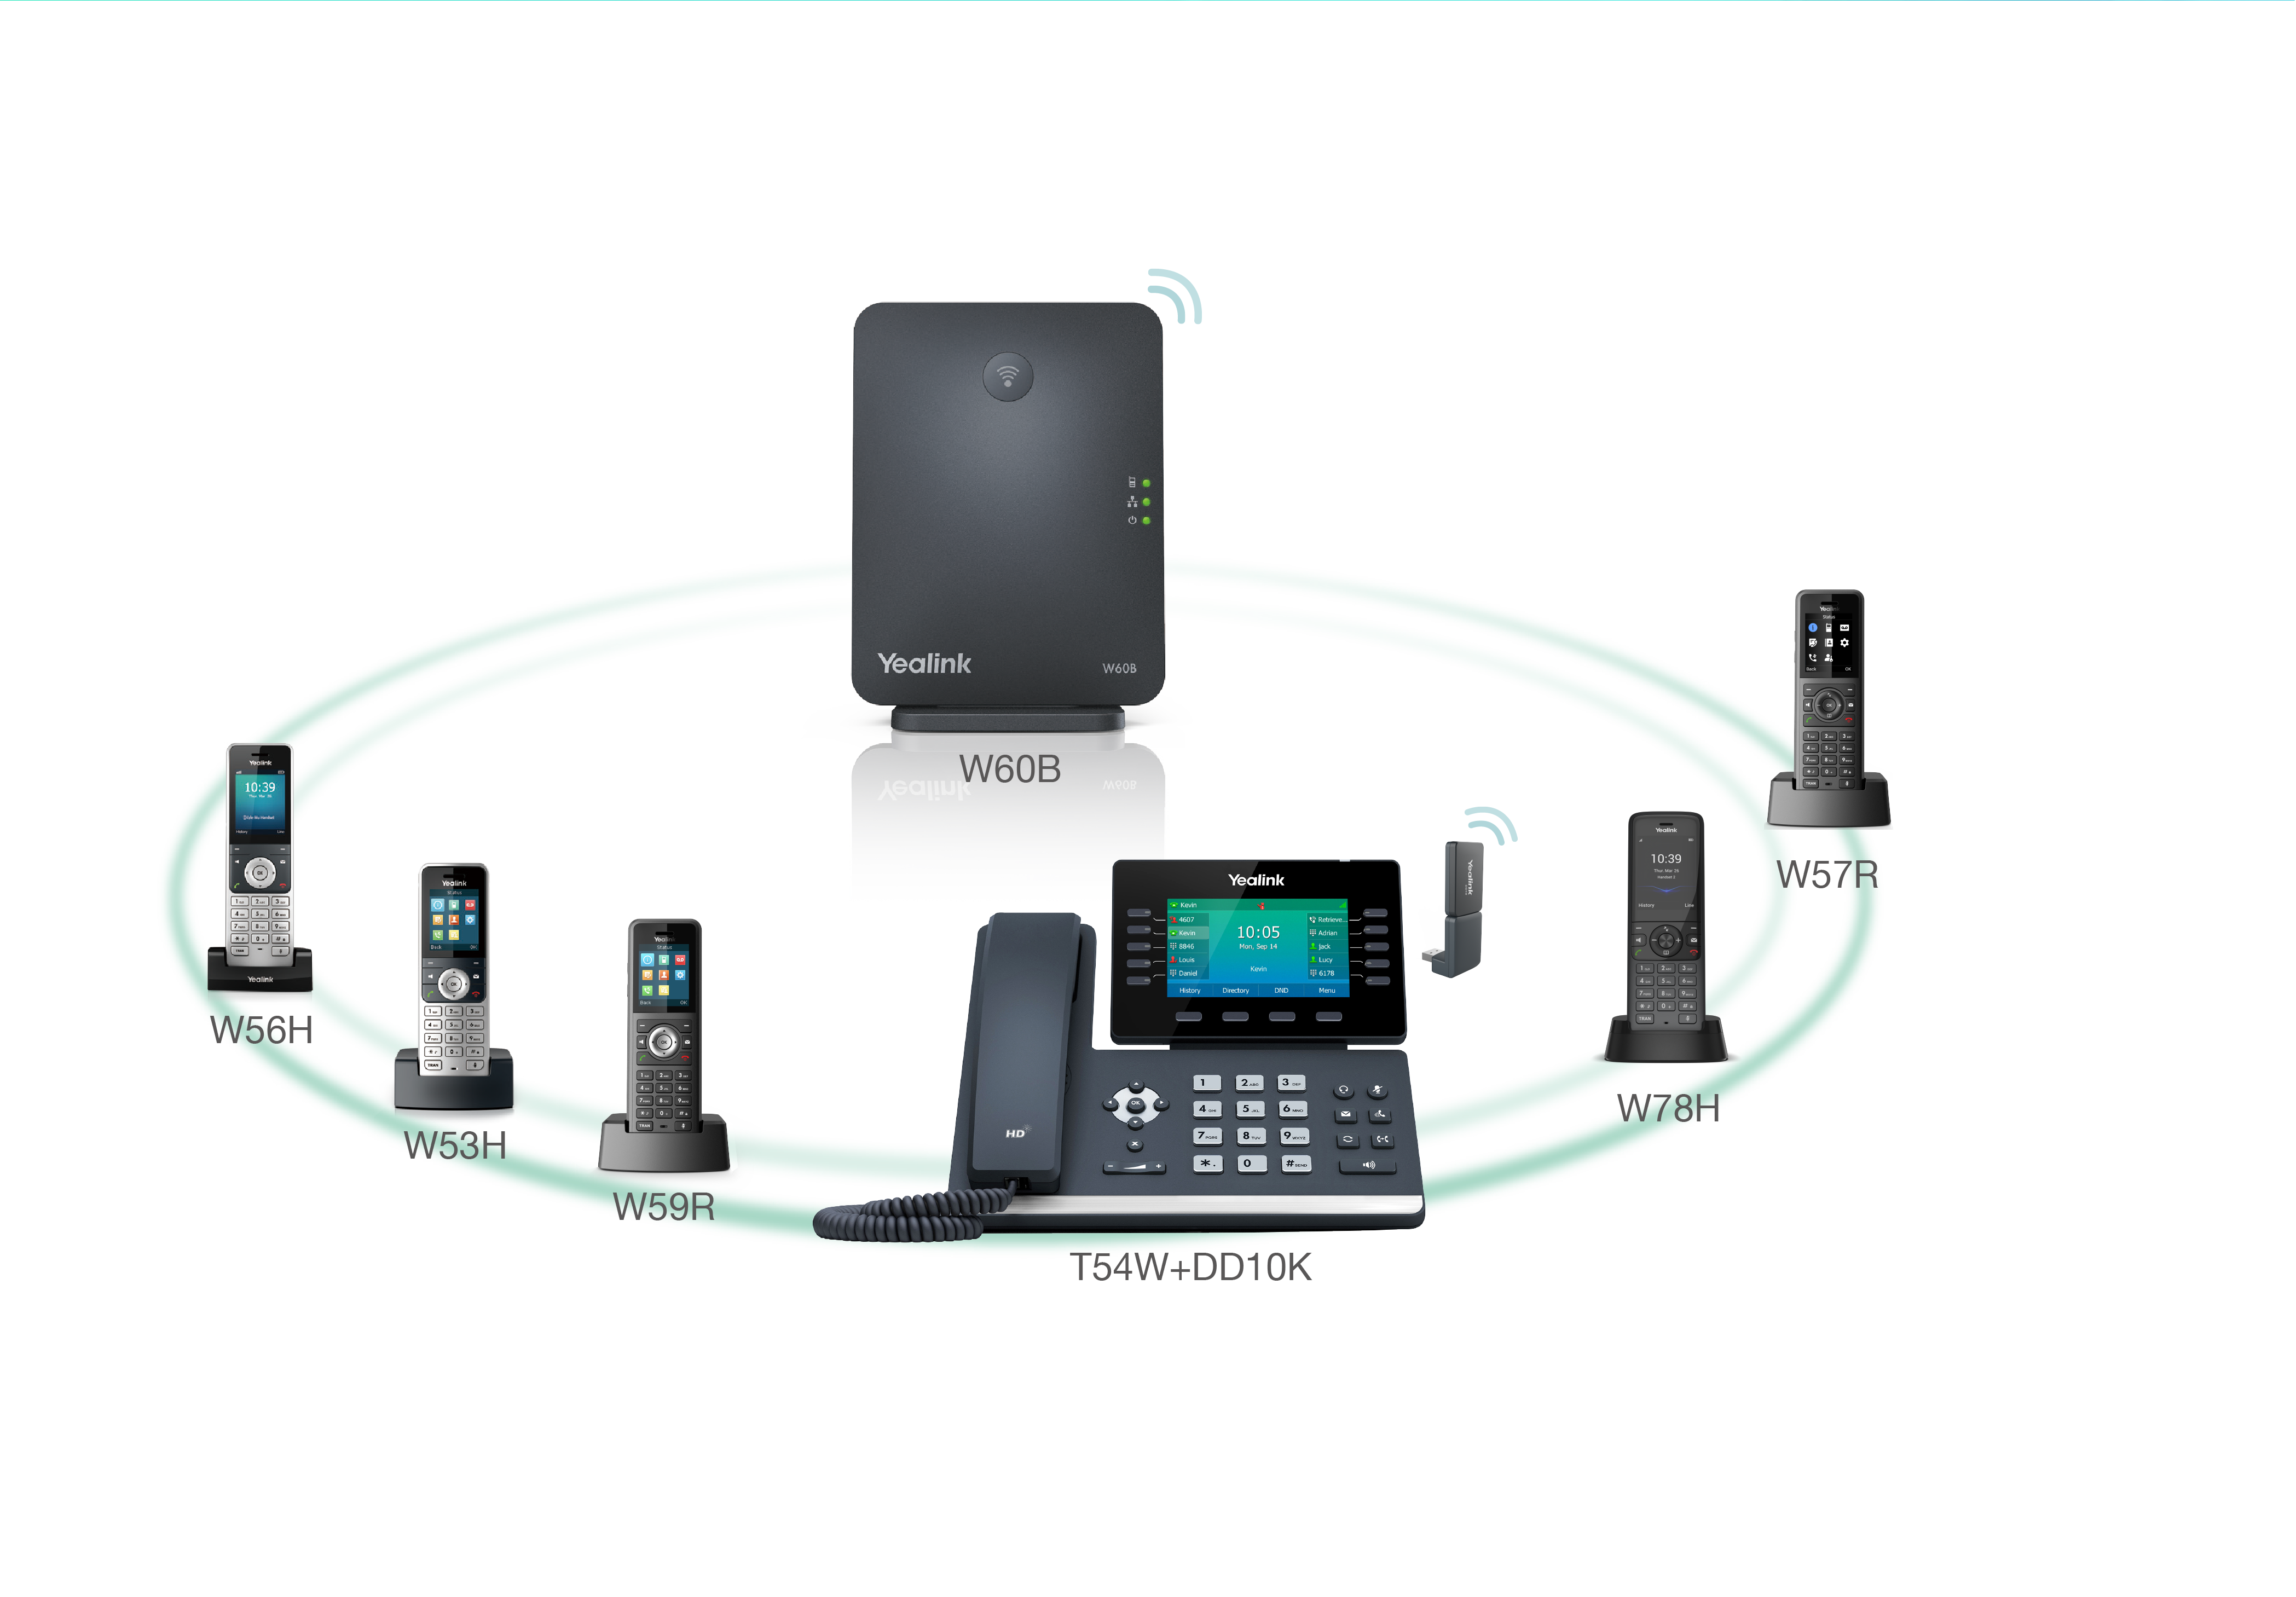 voip phone service for business,desktop phones,wireless conference phone